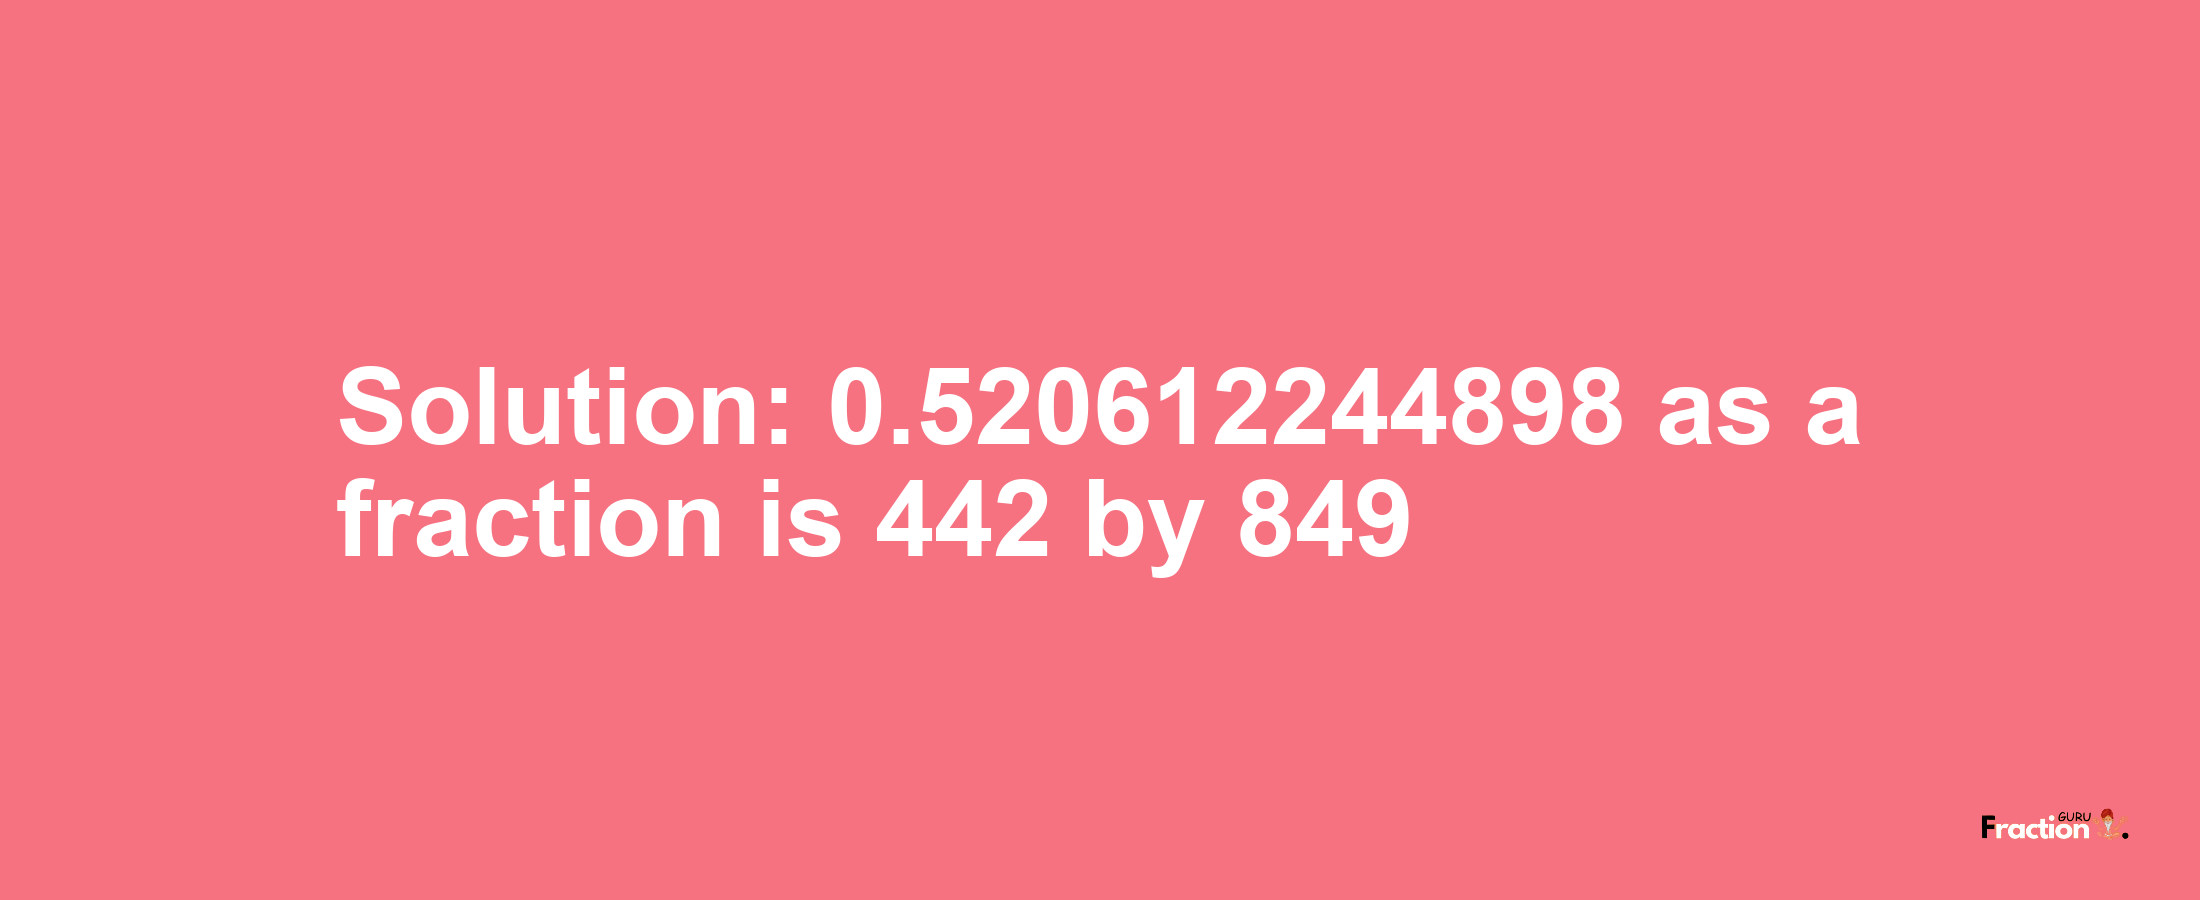 Solution:0.520612244898 as a fraction is 442/849